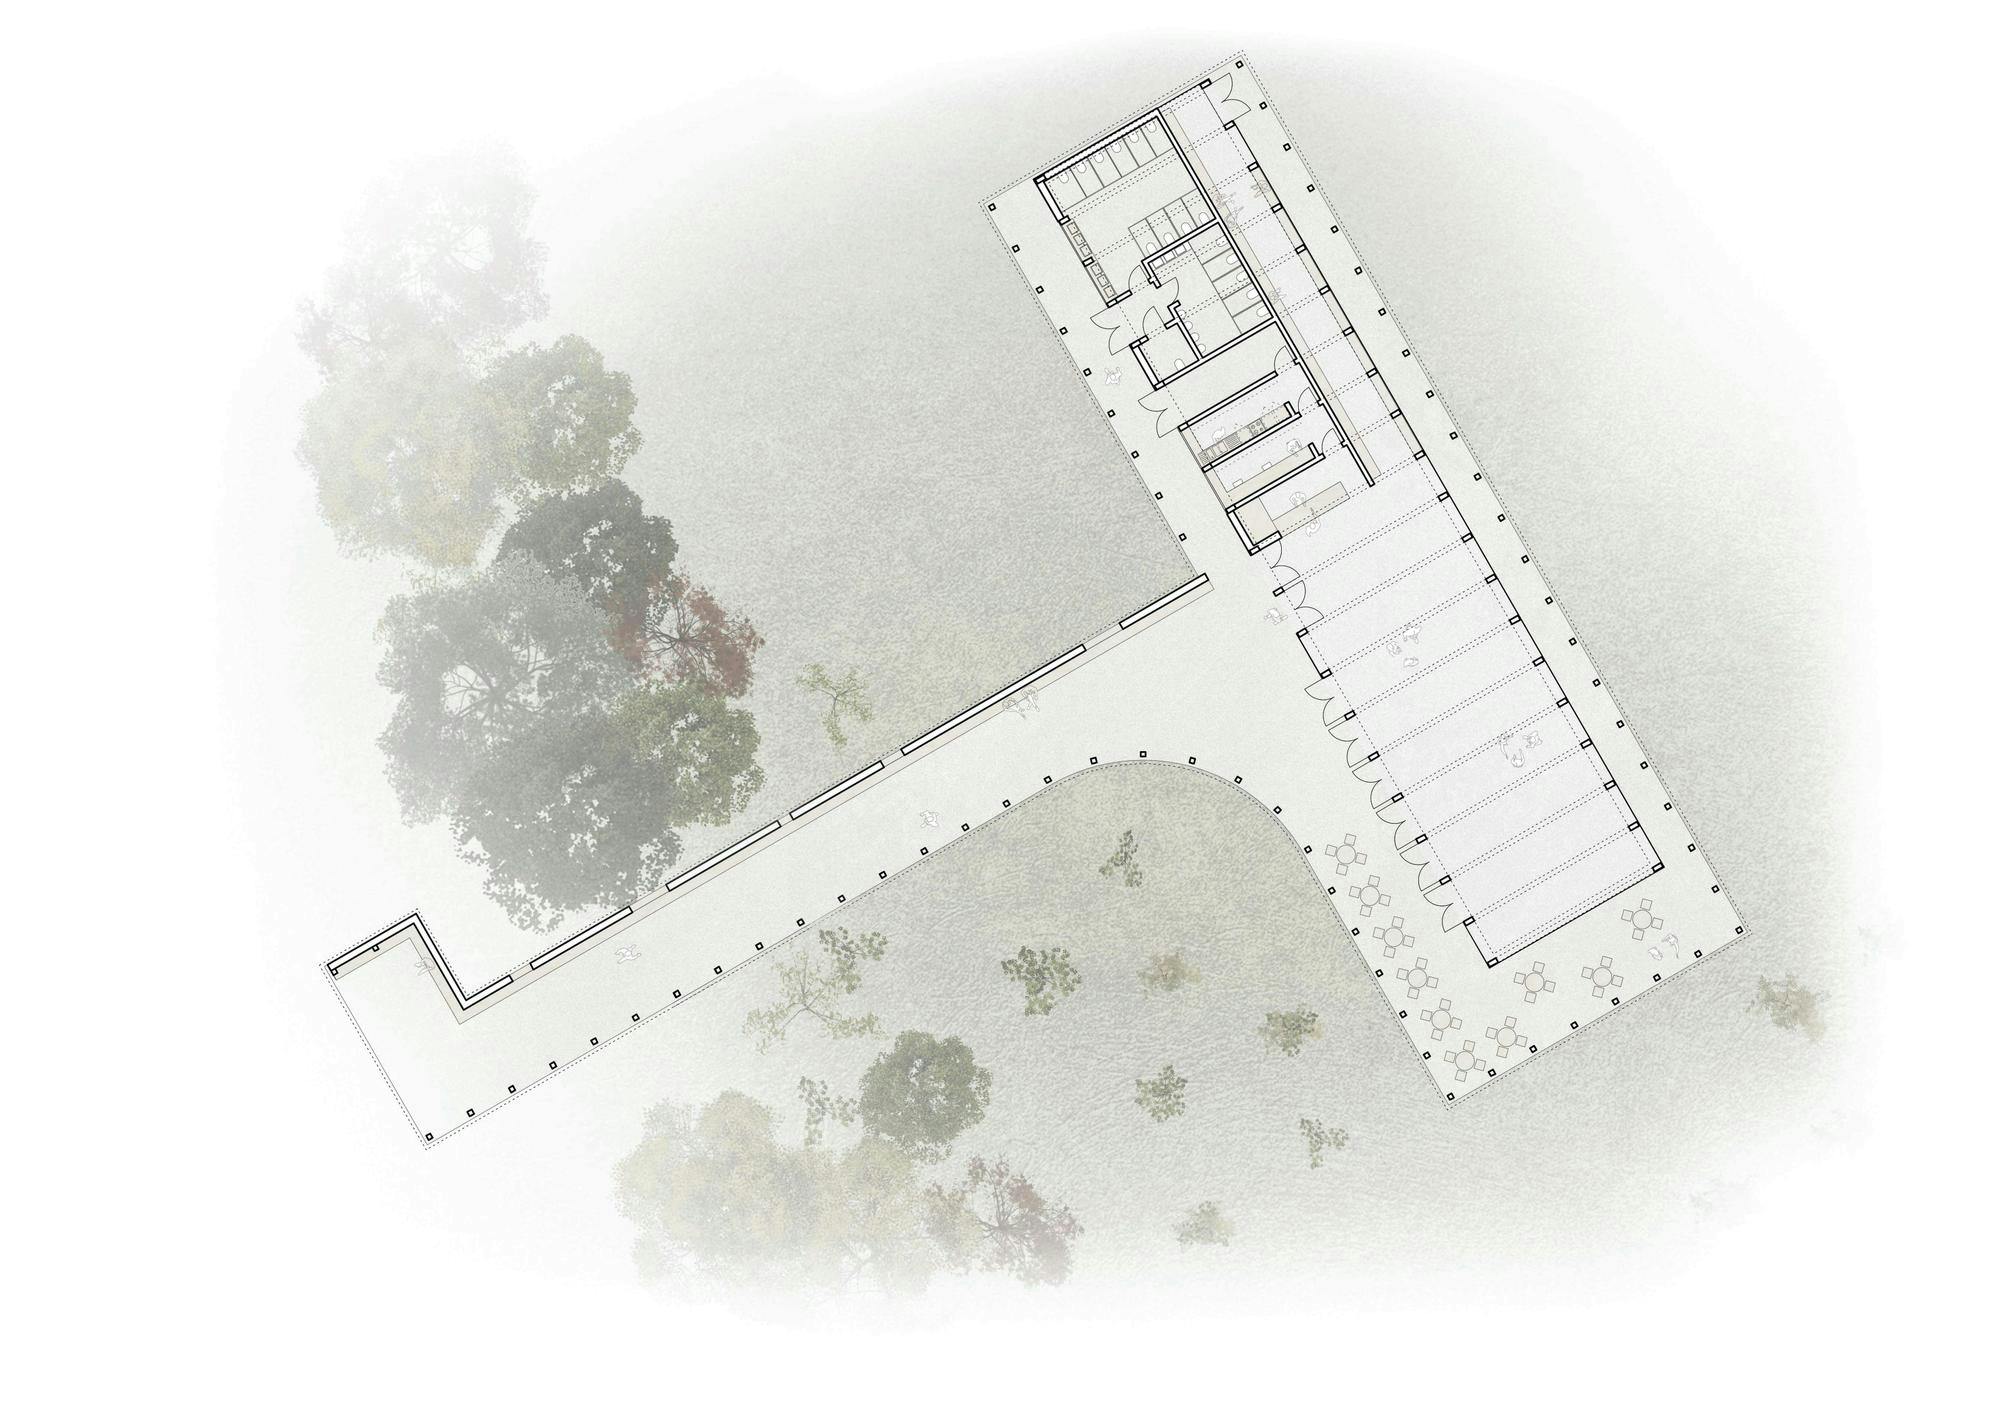 Plan of Langley Vale visitor centre by Studio Bark